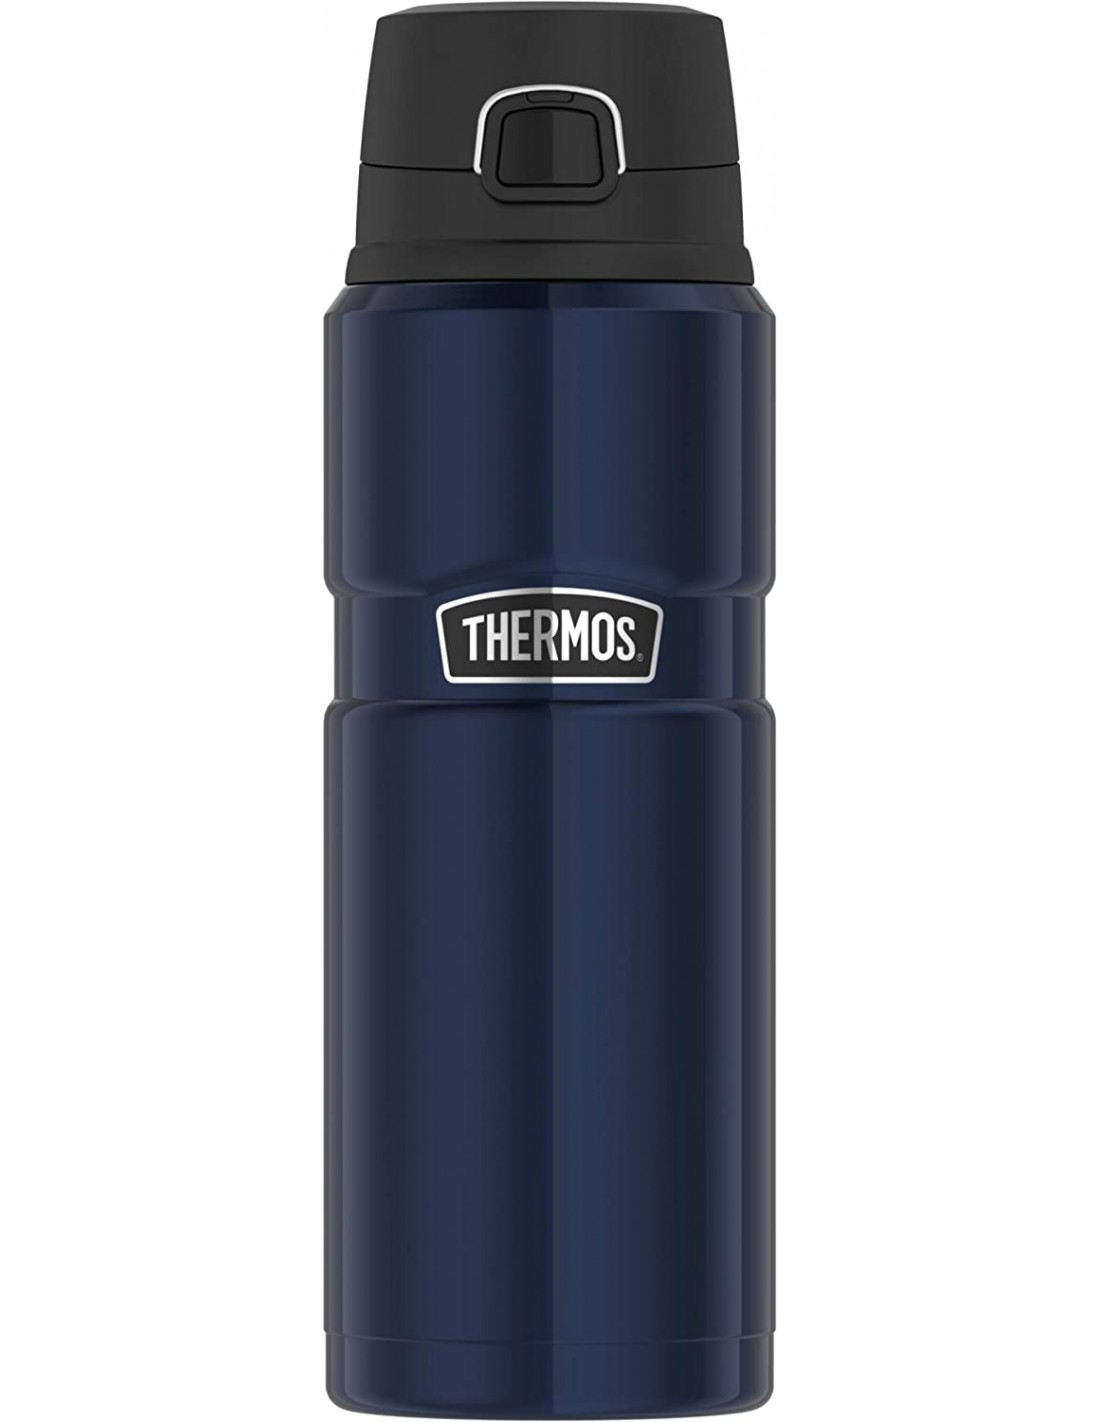 Thermos Isoliertrinkflasche Stainless King, midnight blue polished, 0,7 Liter Trinkflaschenfarbe - Blue, Trinkflaschenvolumen - 0,7 Liter, von Thermos